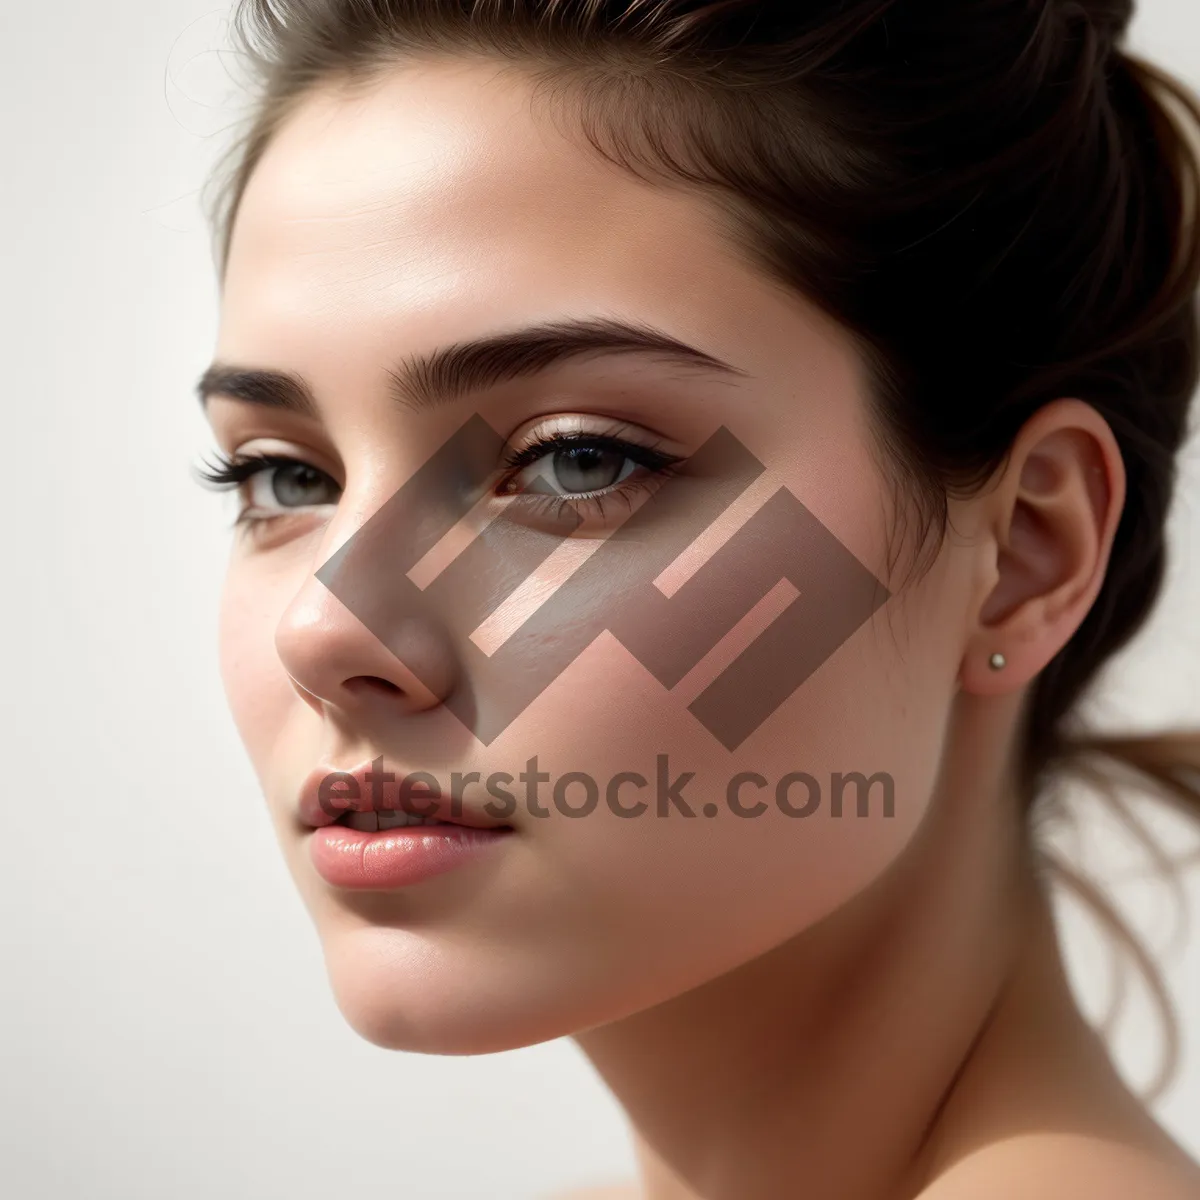 Picture of Sultry Beauty: Sensual, Attractive Model with Stunning Makeup